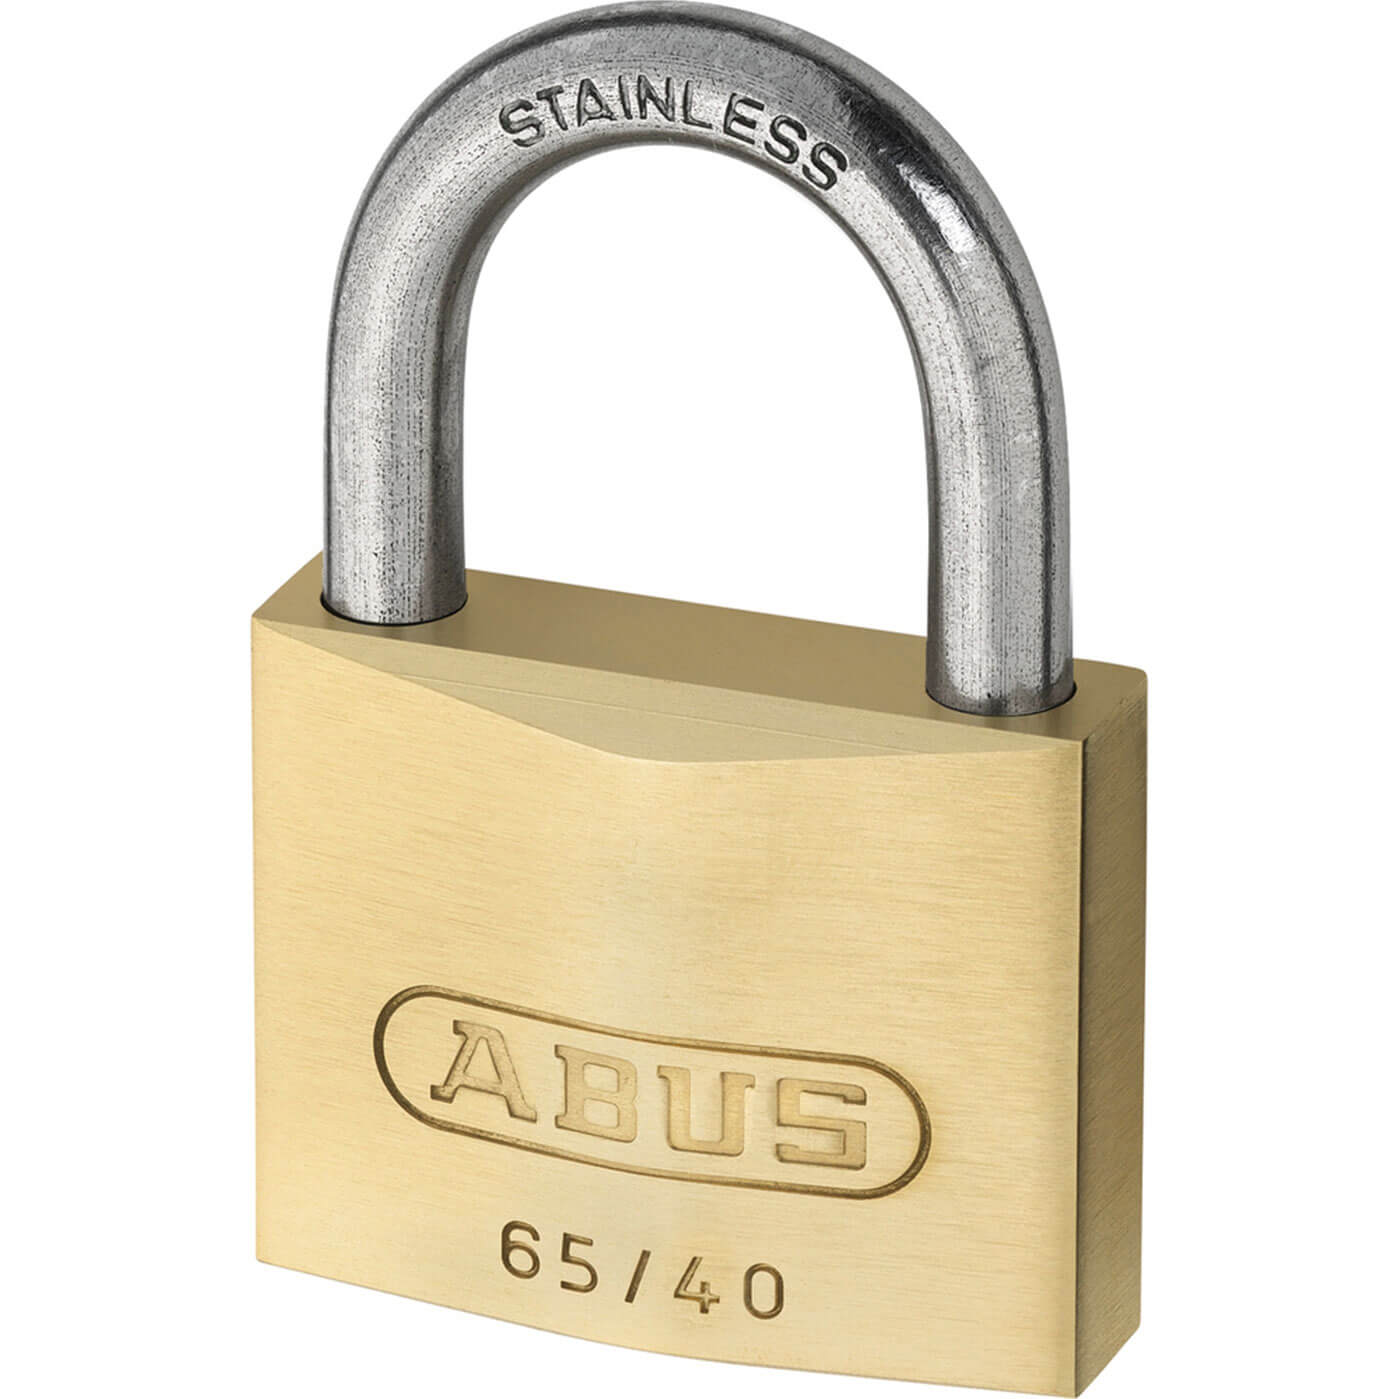 Image of Abus 40mm 65 Series Compact Brass Padlock With Stainless Steel Shackle Keyed Alike To Suite 6404